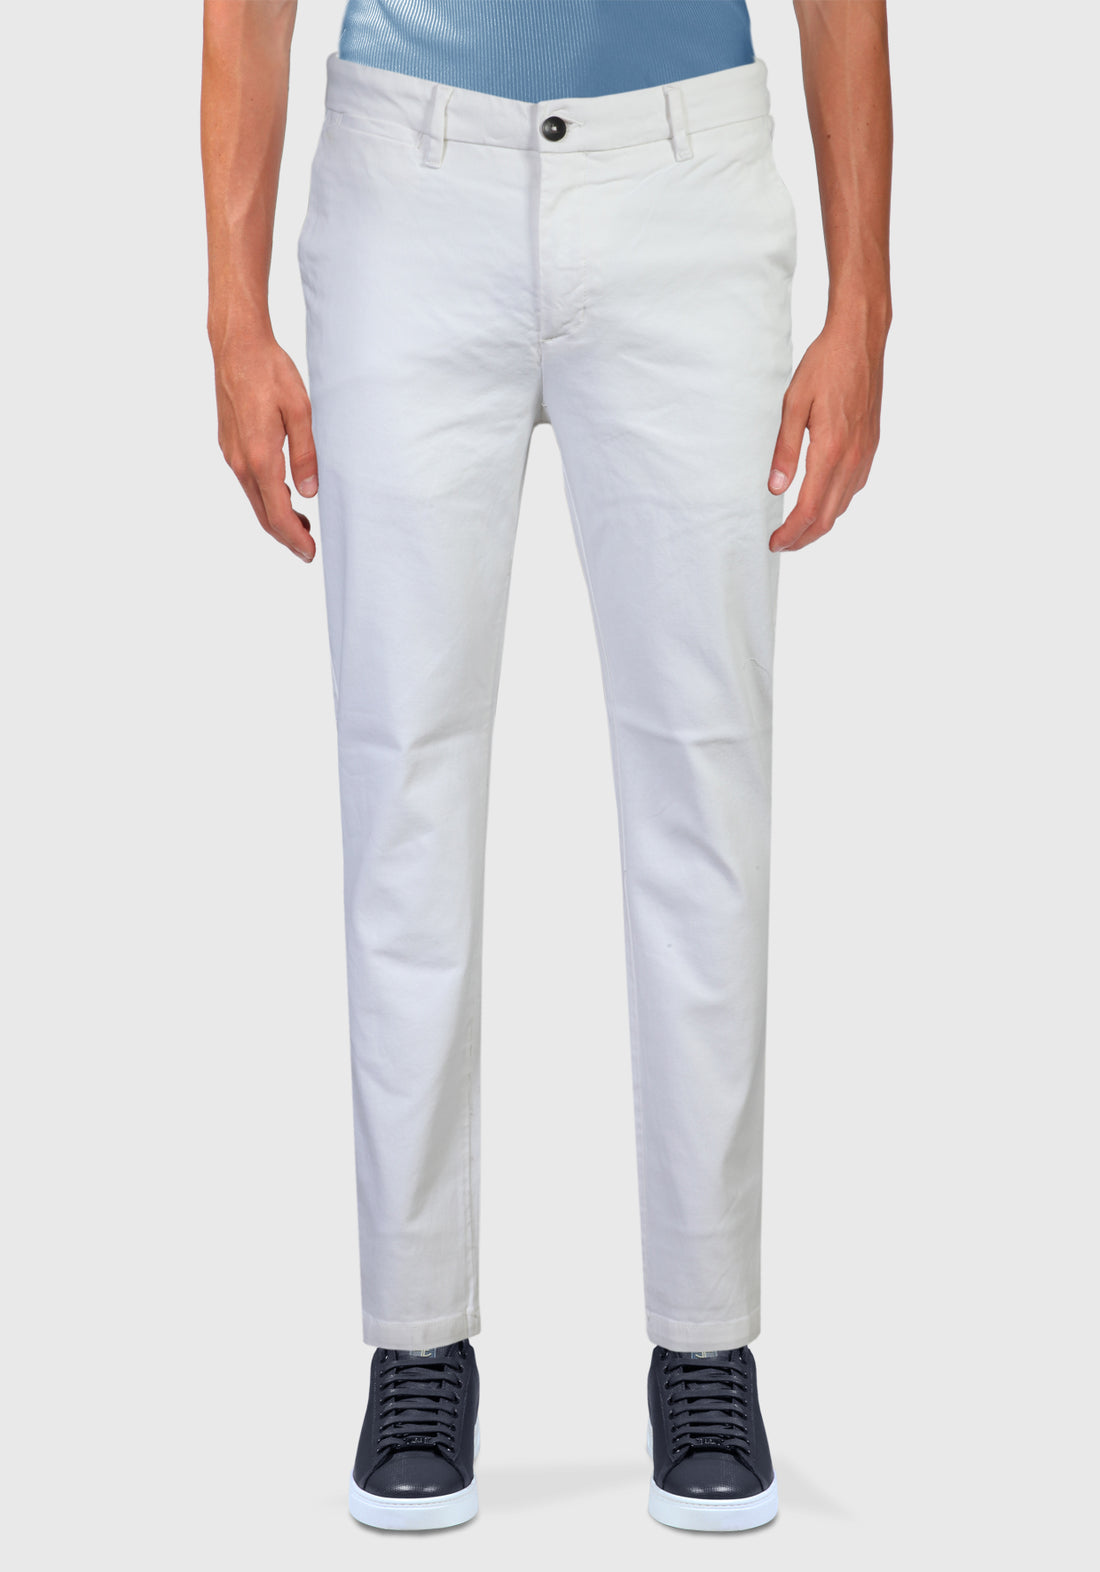 America Pocket Trousers in Warm Woven Cotton - White